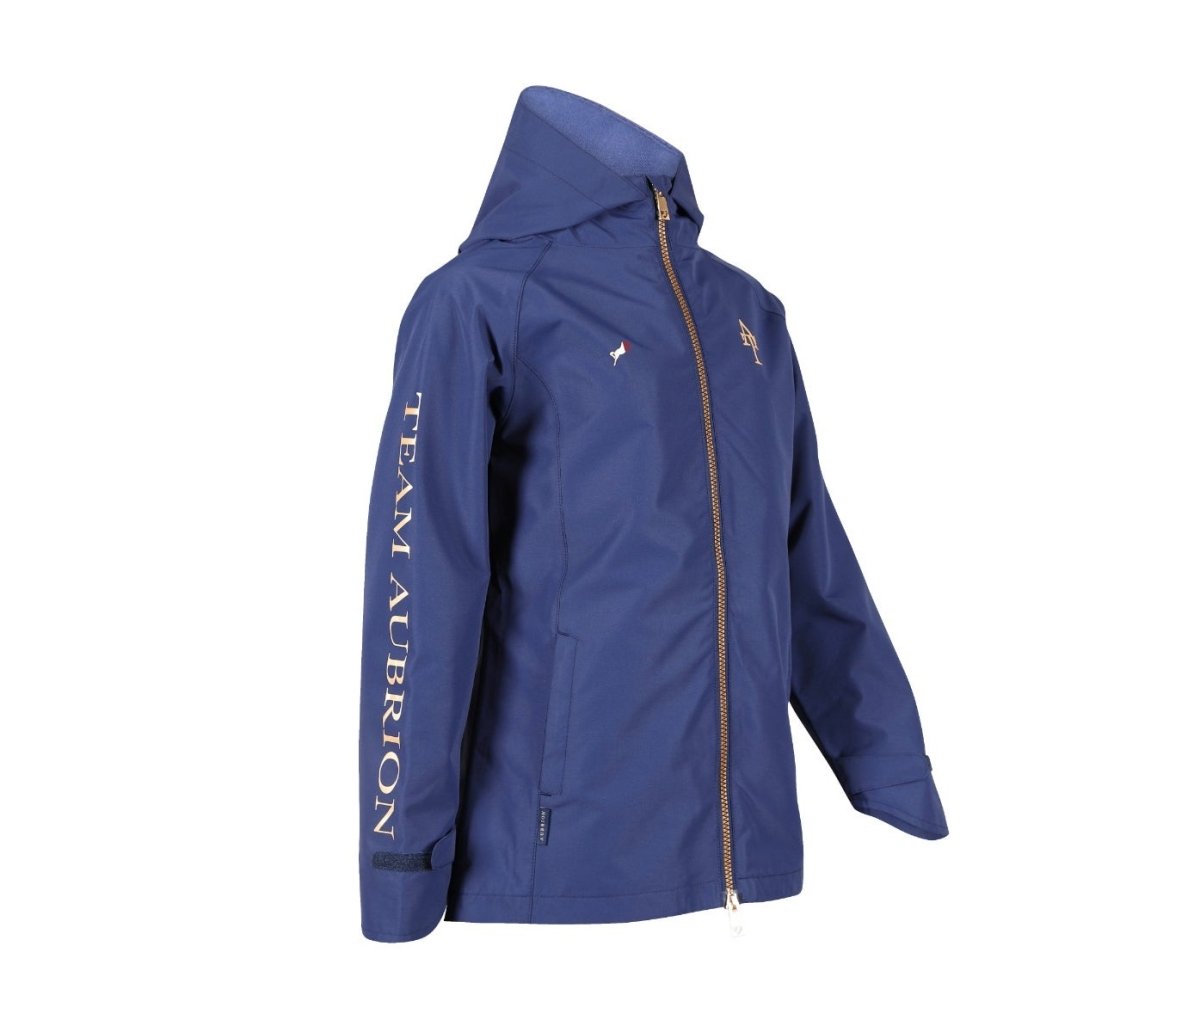 Aubrion SS24 Team Waterproof Jacket - Young Rider - Navy - 11/12 Years